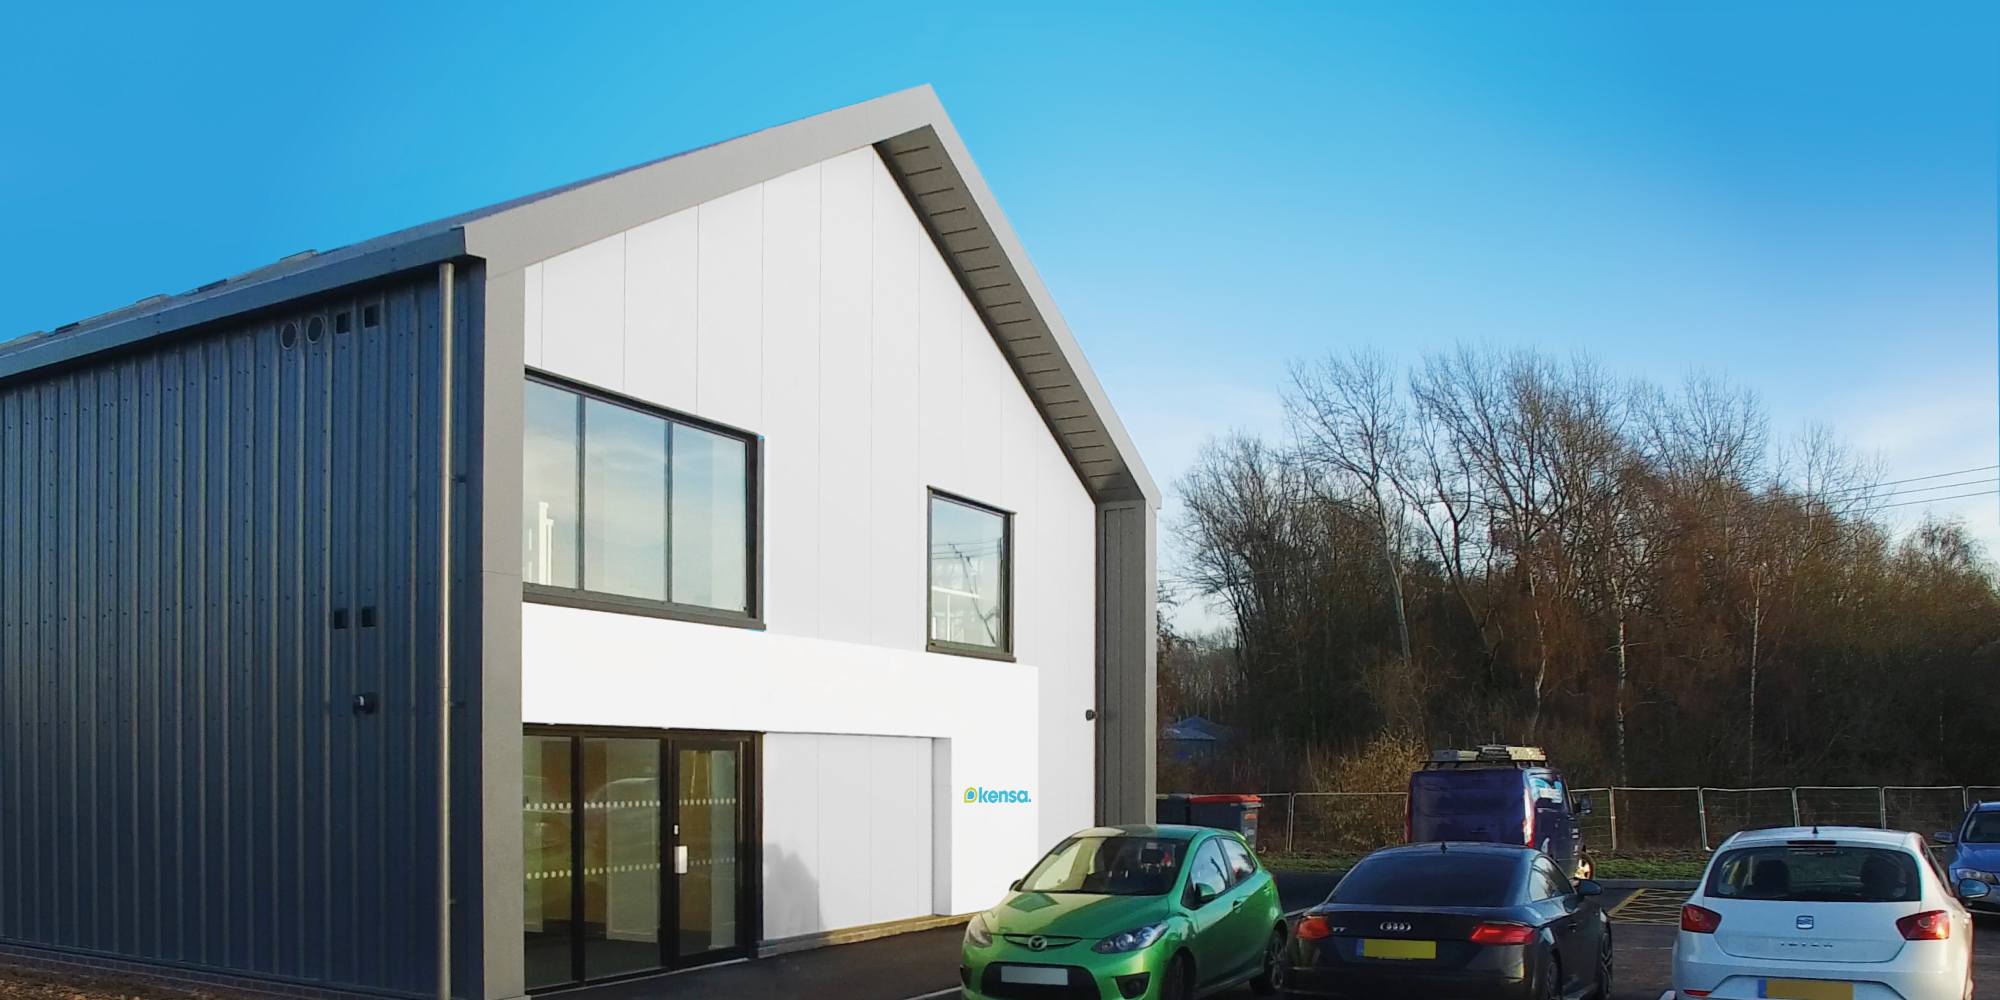 Kensa have moved to a new address on Hortonwood West in Telford